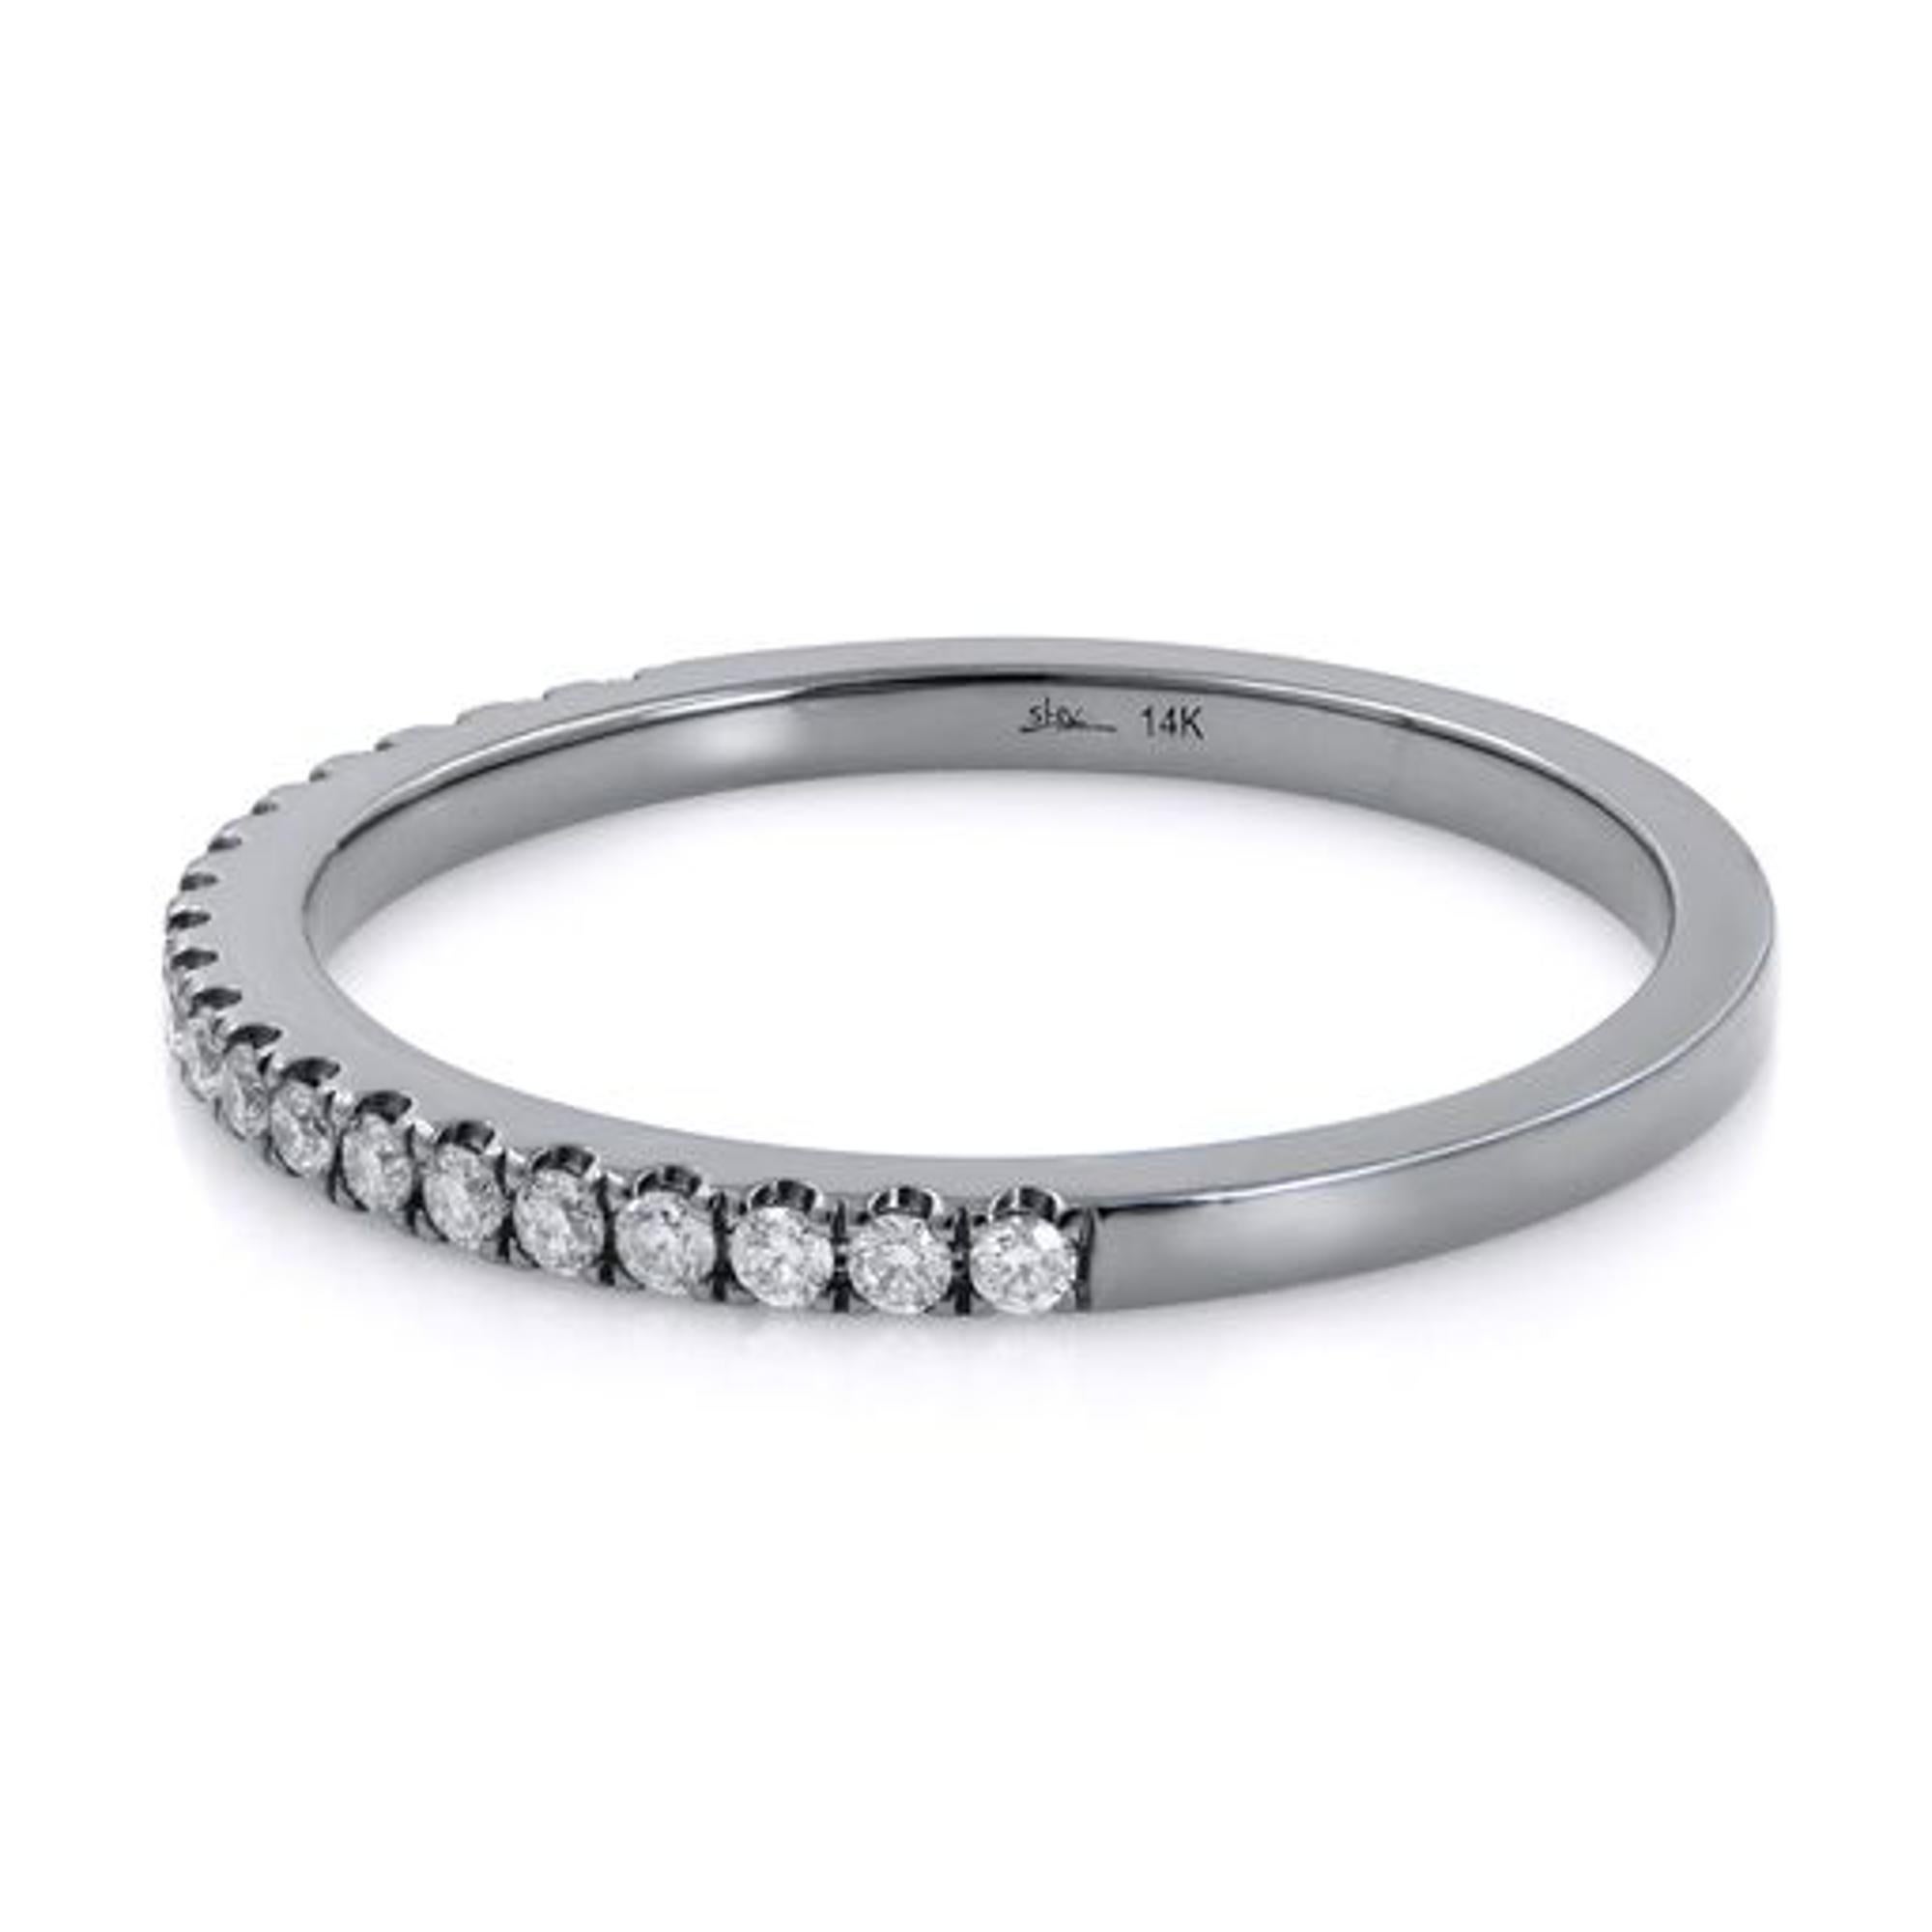 A trendy piece of jewelry with real gold and diamonds. This antique style micro pave band is crafted in 14k solid white gold and black rhodium plated. Set with micro pave diamonds totaling 0.18cttw. These diamonds are 100% natural and genuine G-H